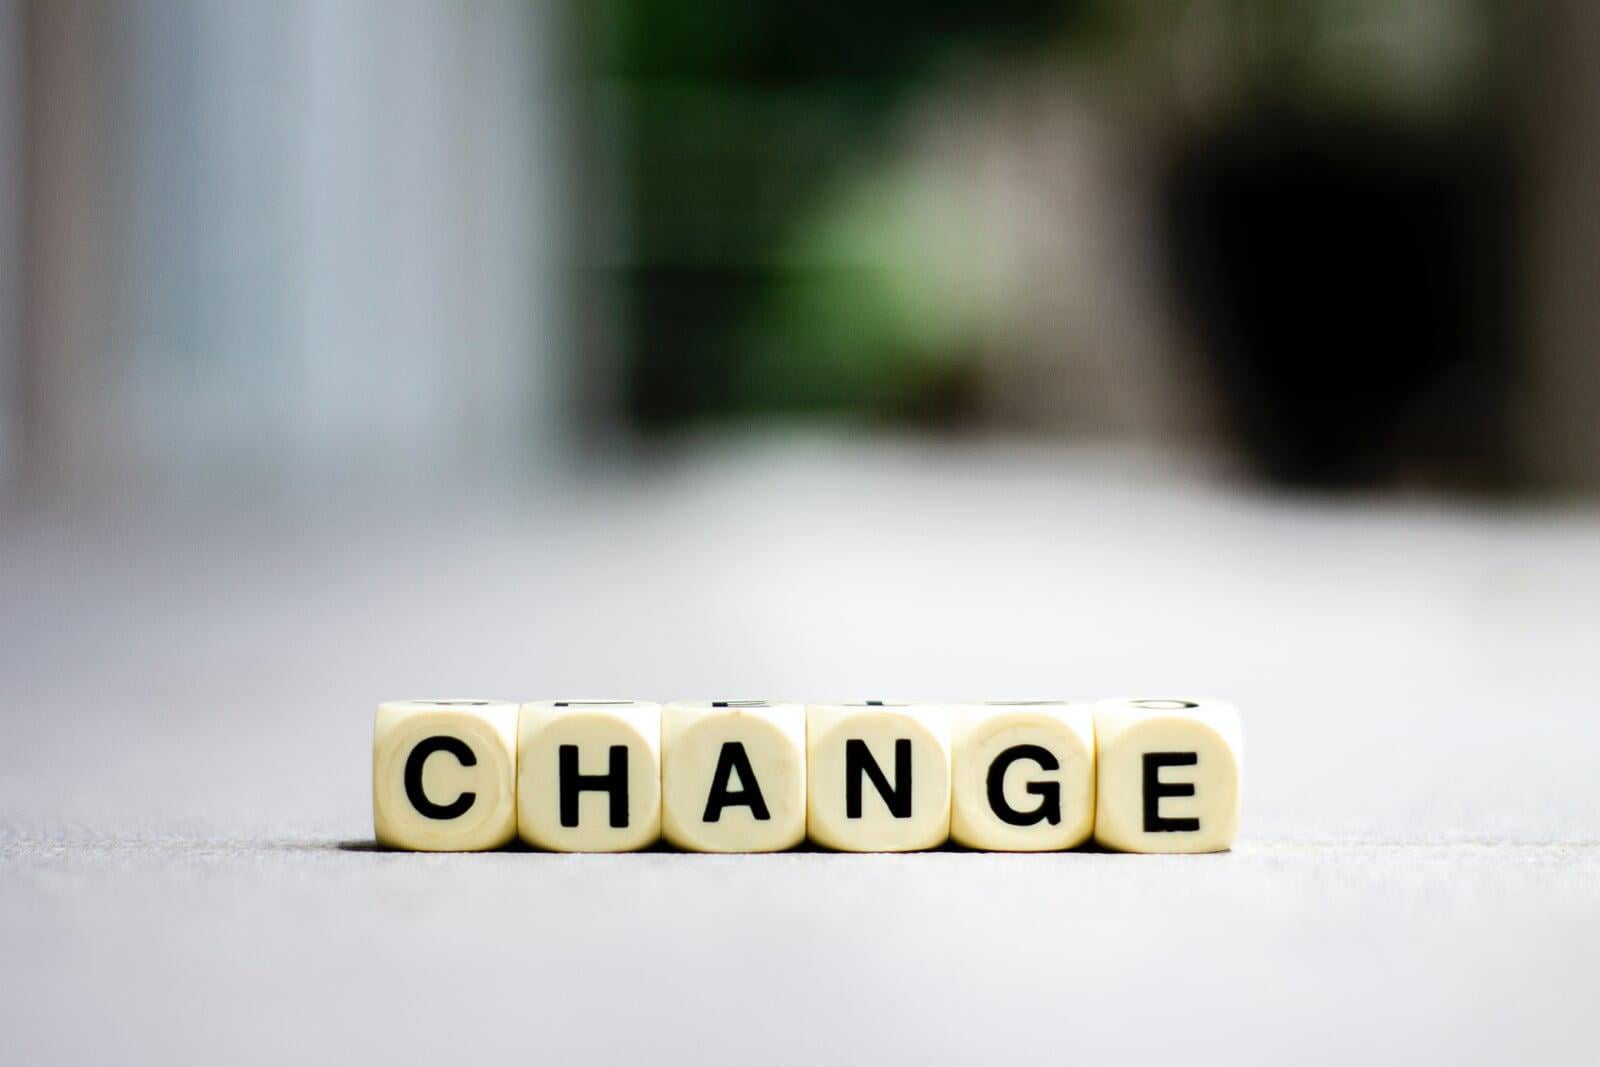 The 8 key steps for successfully leading change